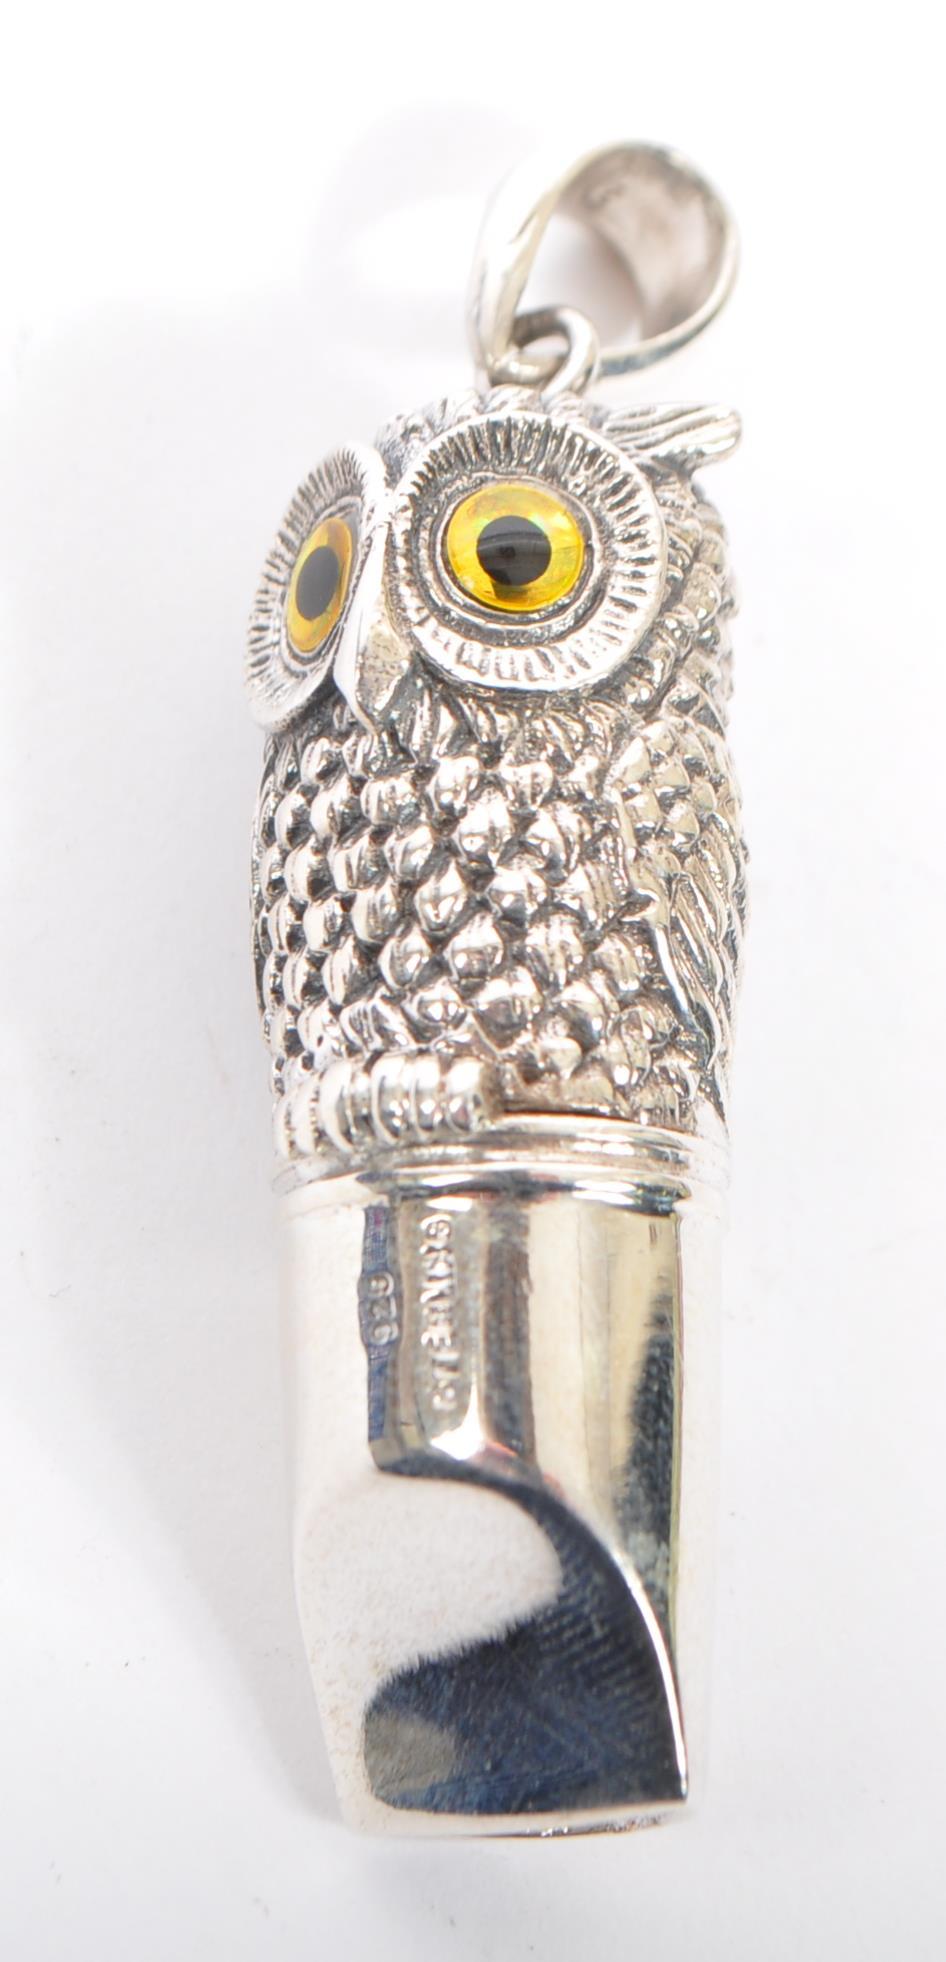 SILVER STAMPED STERLING 925 OWL WHISTLE - Image 2 of 5